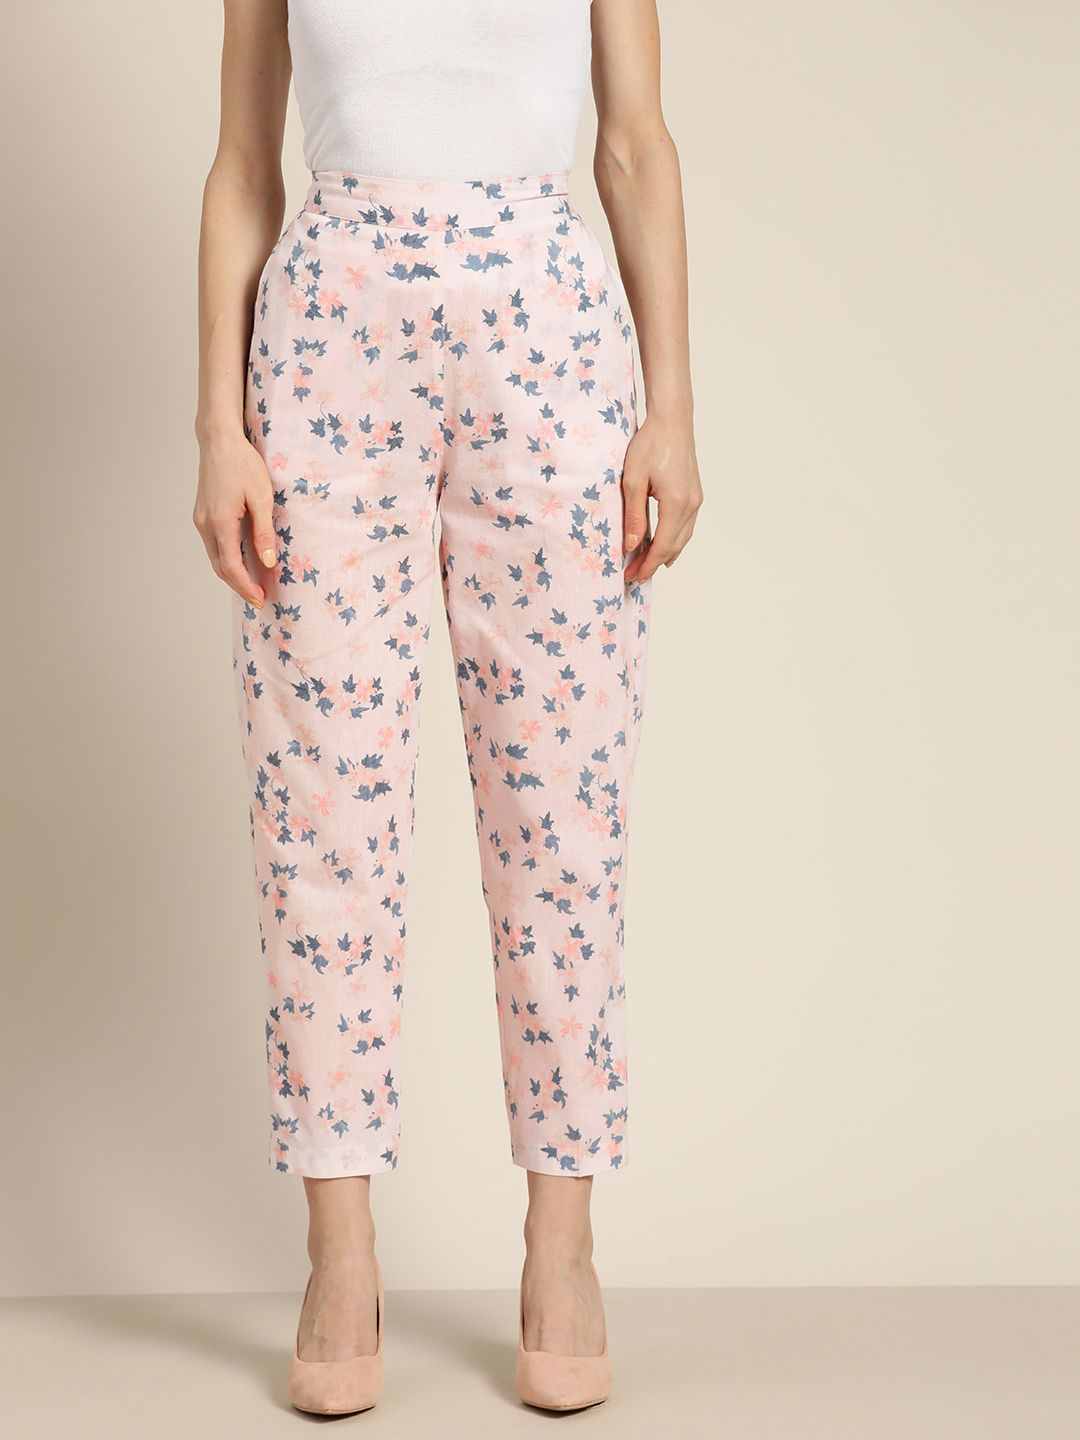 Shae by SASSAFRAS Women Pink Floral Printed Trousers Price in India